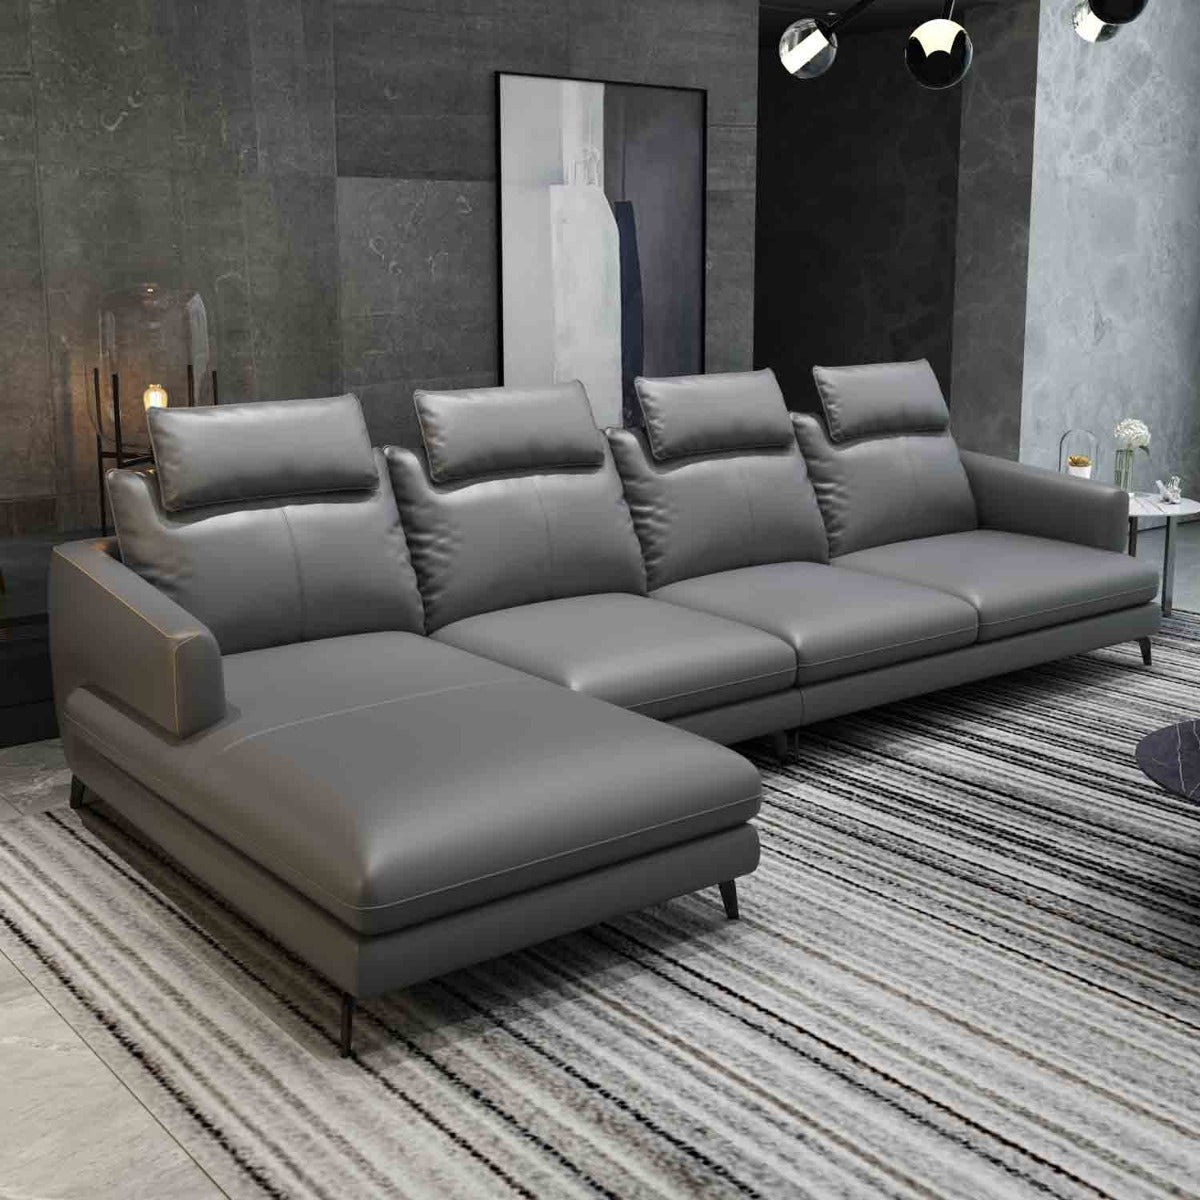 European Furniture - Marconi Left Hand Facing Sectional in Smokey Grey - 74539L-3LHF - New Star Living